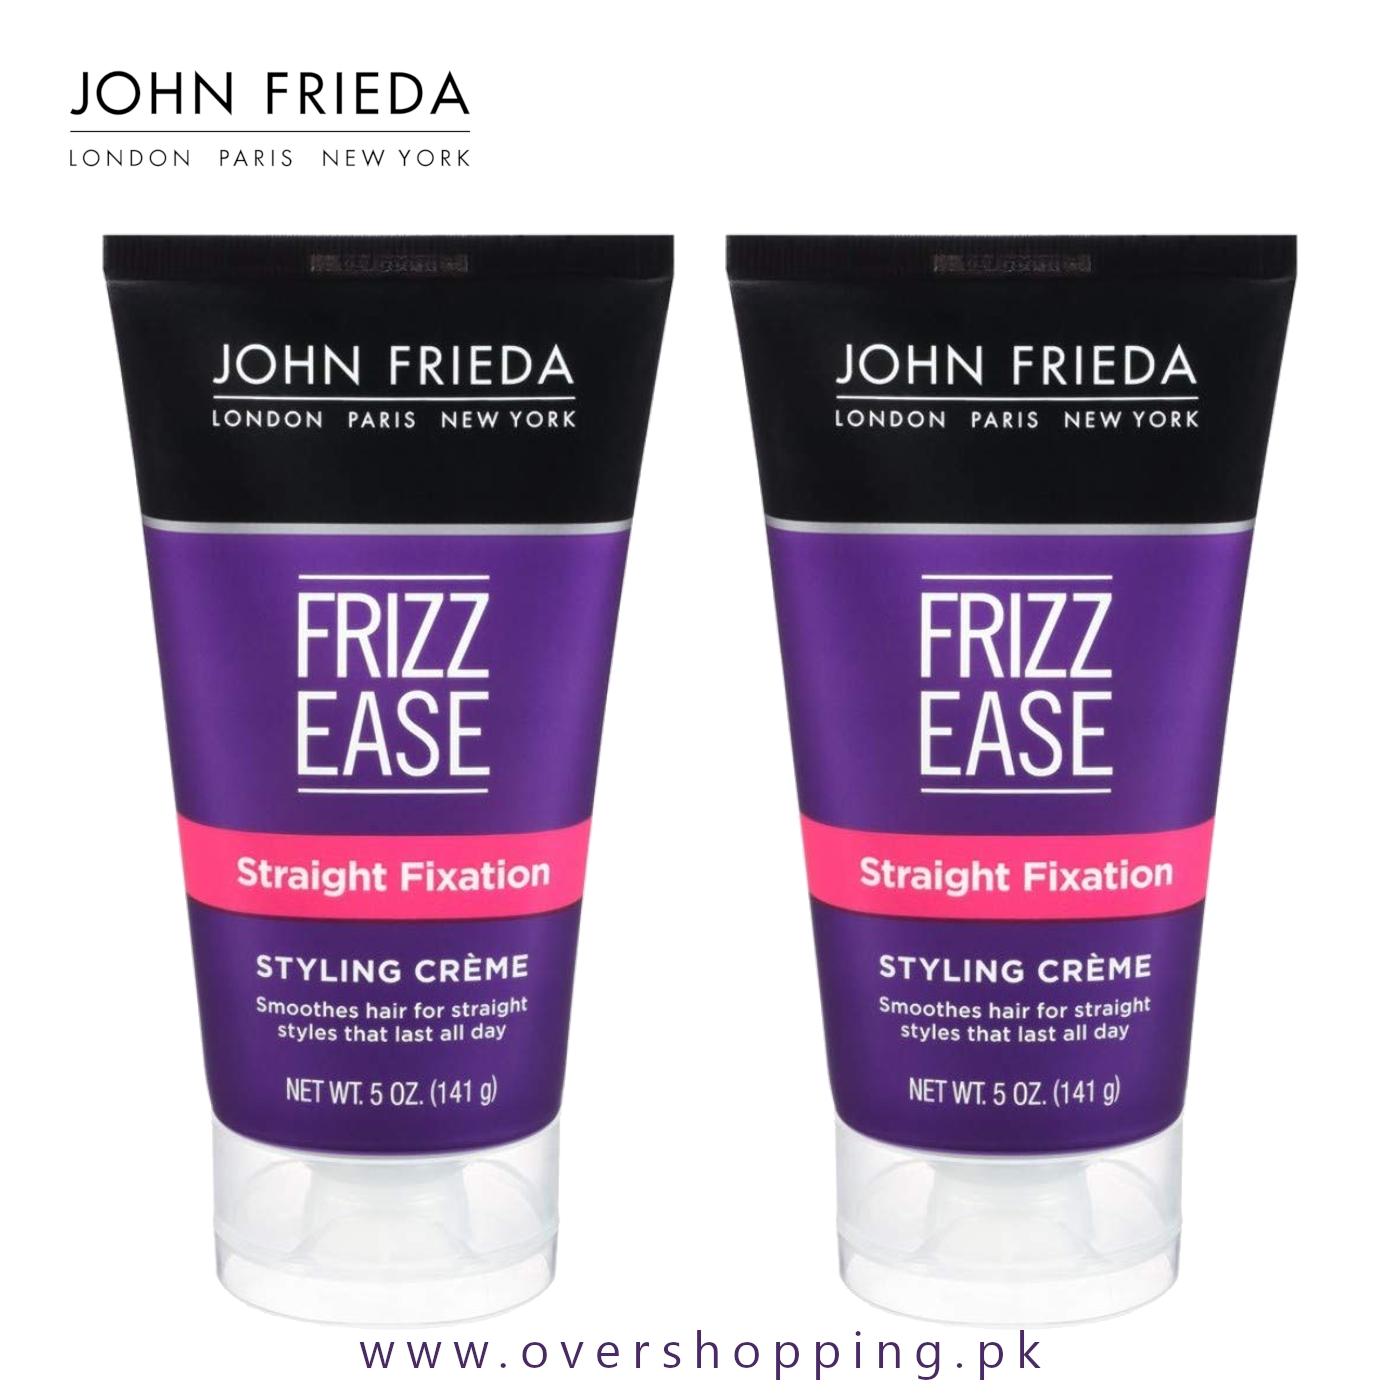 John Frieda Frizz-Ease Straight Fixation Styling Creme, Pack of 2 - 5 oz